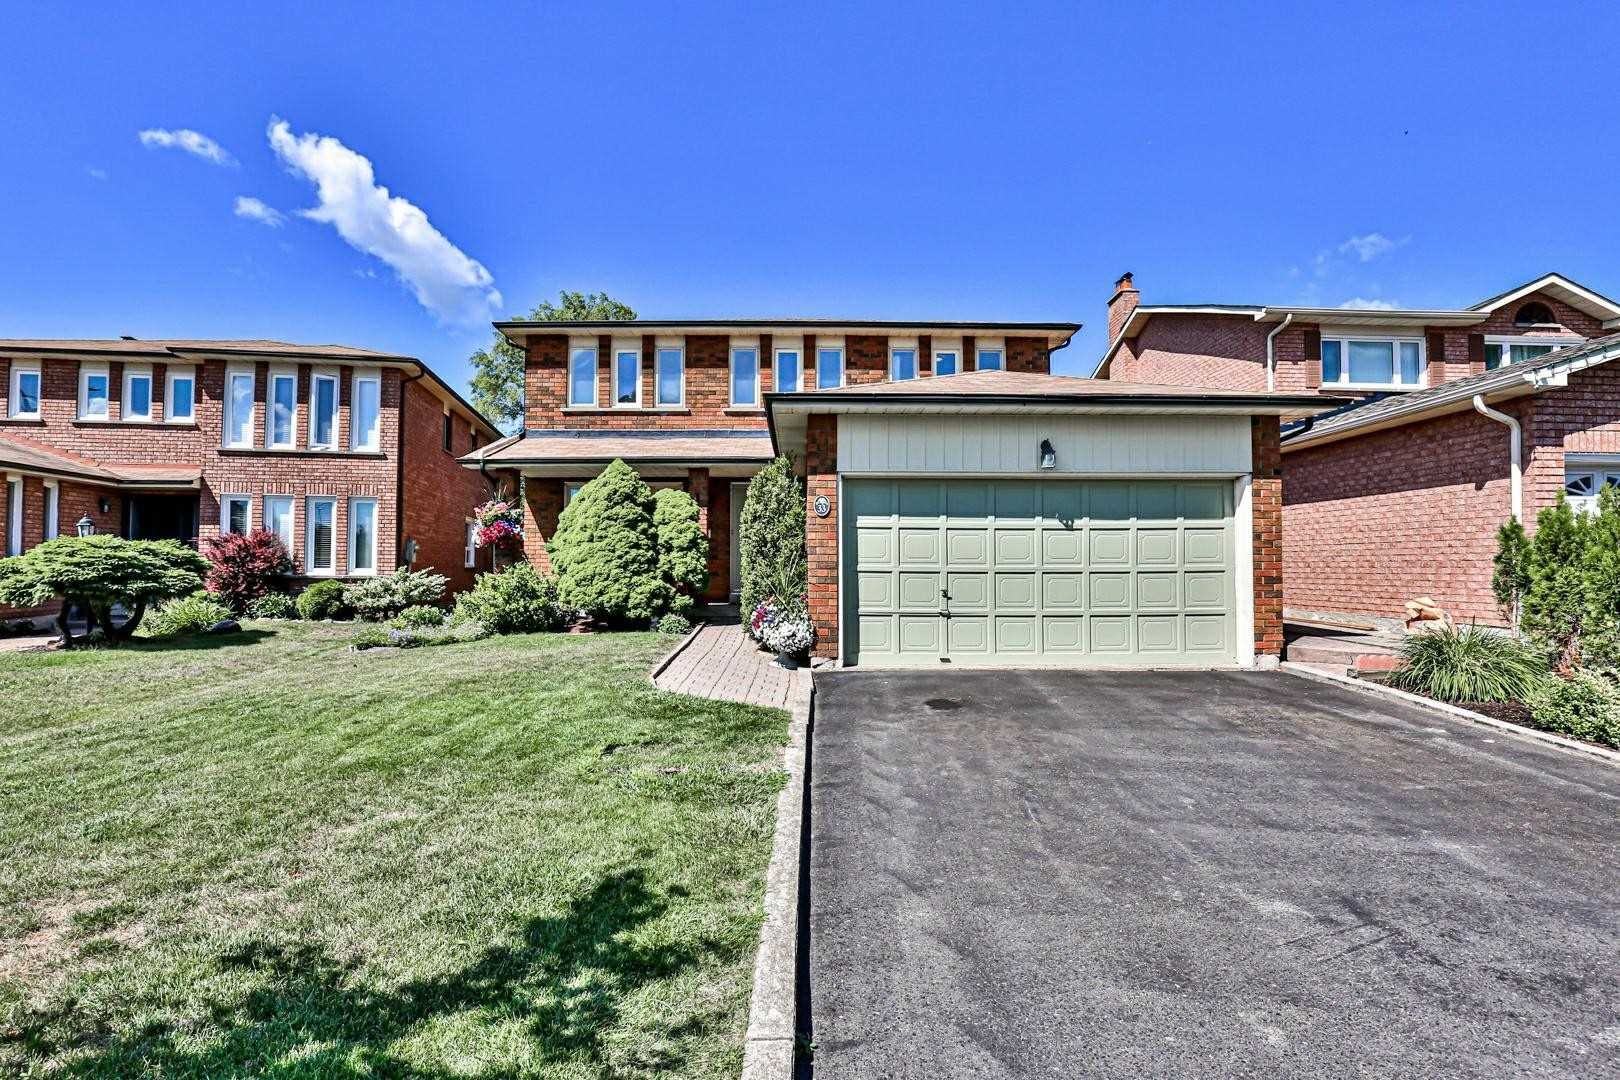 Main Photo: 33 Cobbler Crescent in Markham: Raymerville House (2-Storey) for sale : MLS®# N4840822